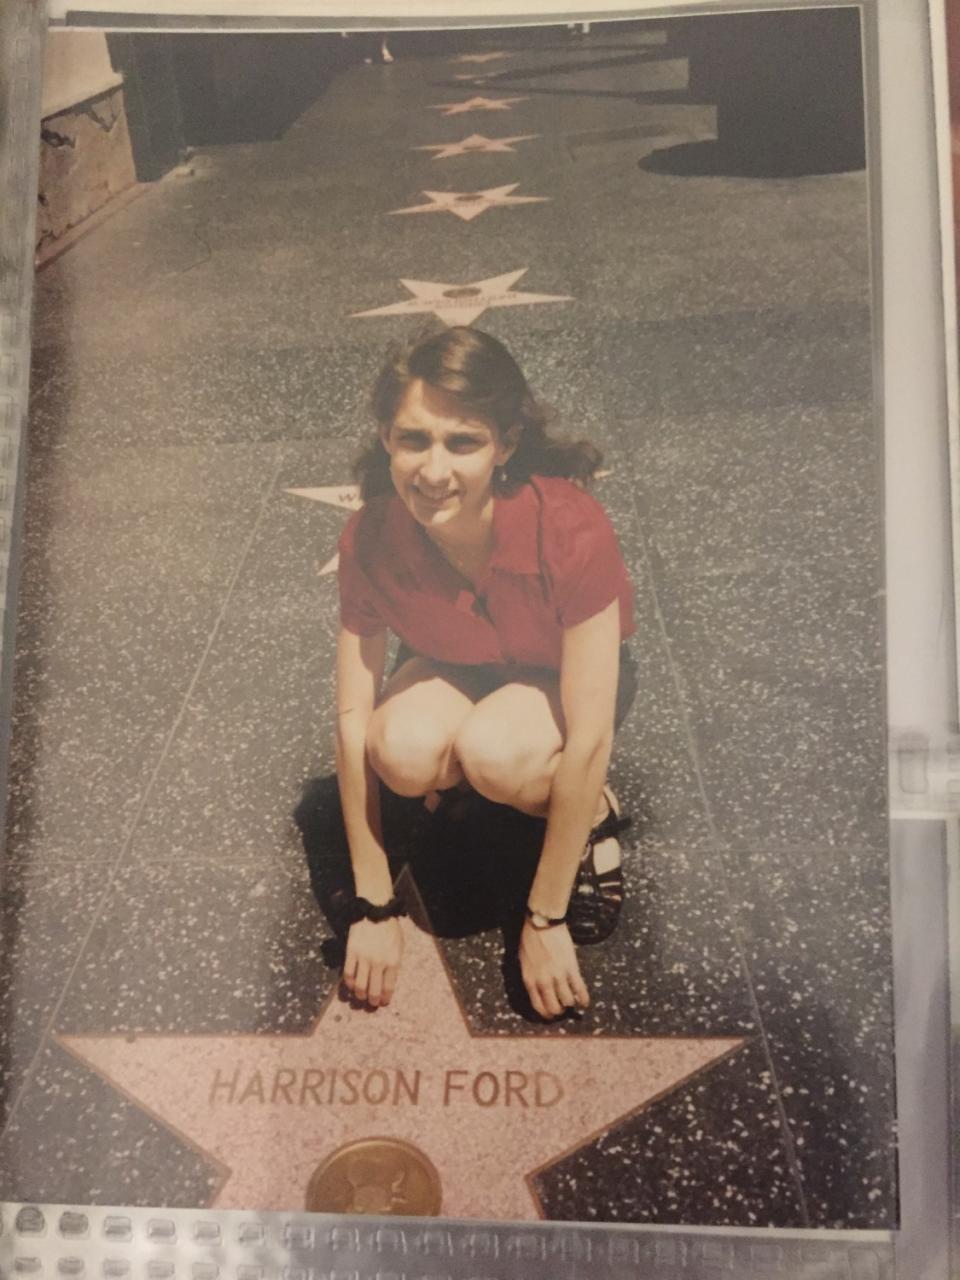 Darla Lansu pays a visit to Harrison Ford's star on the Hollywood Walk of Fame.